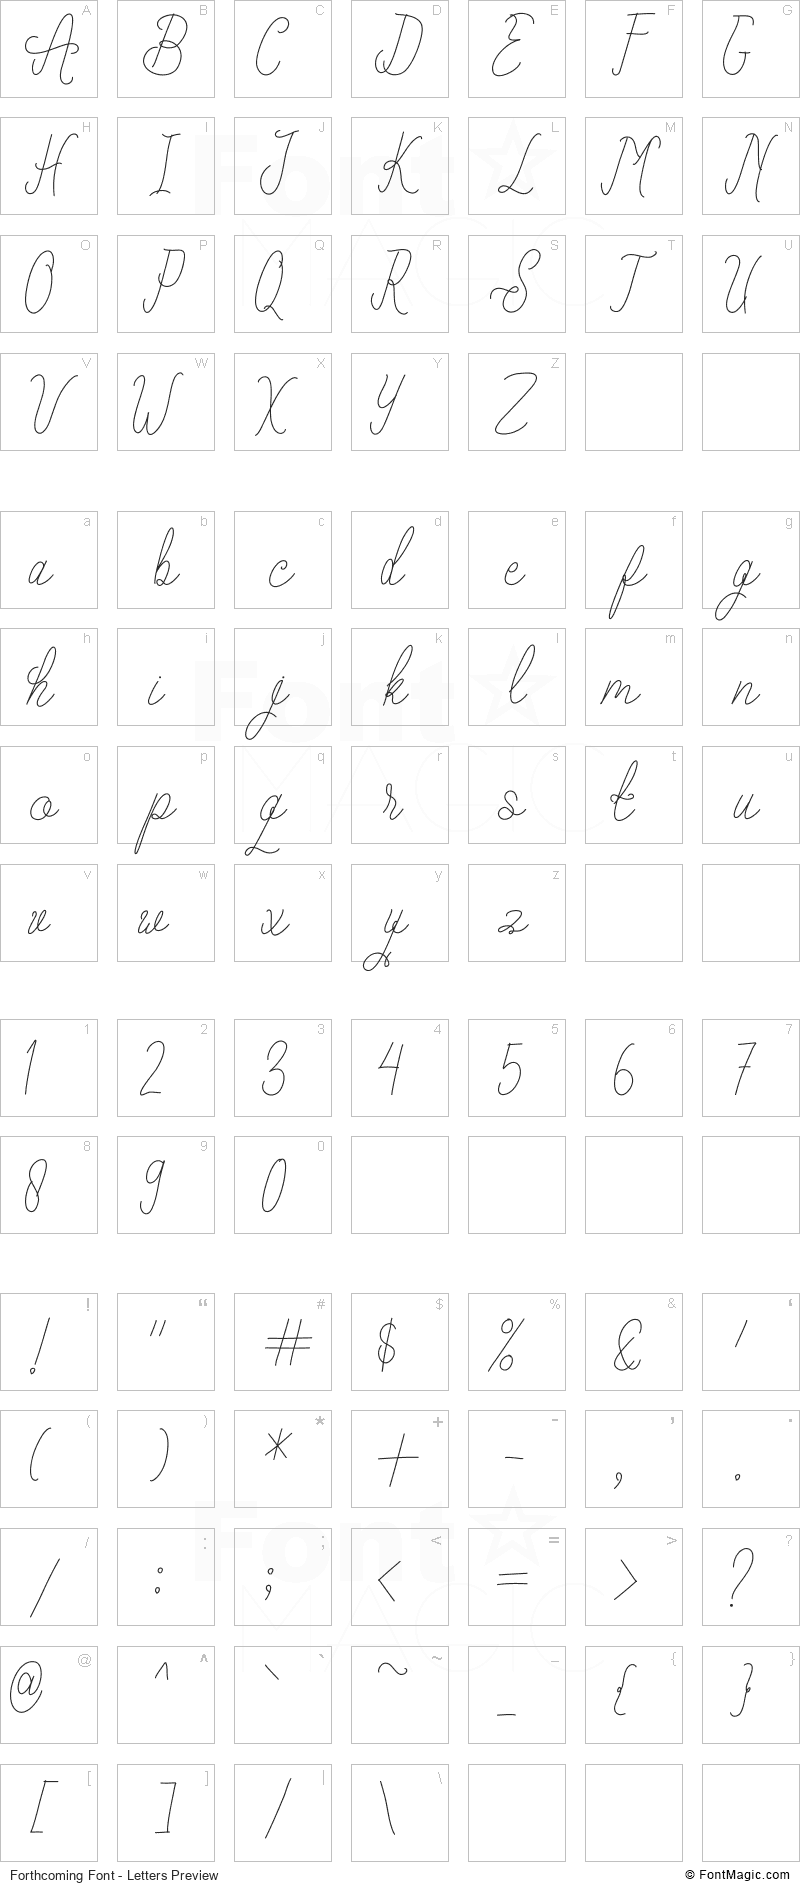 Forthcoming Font - All Latters Preview Chart